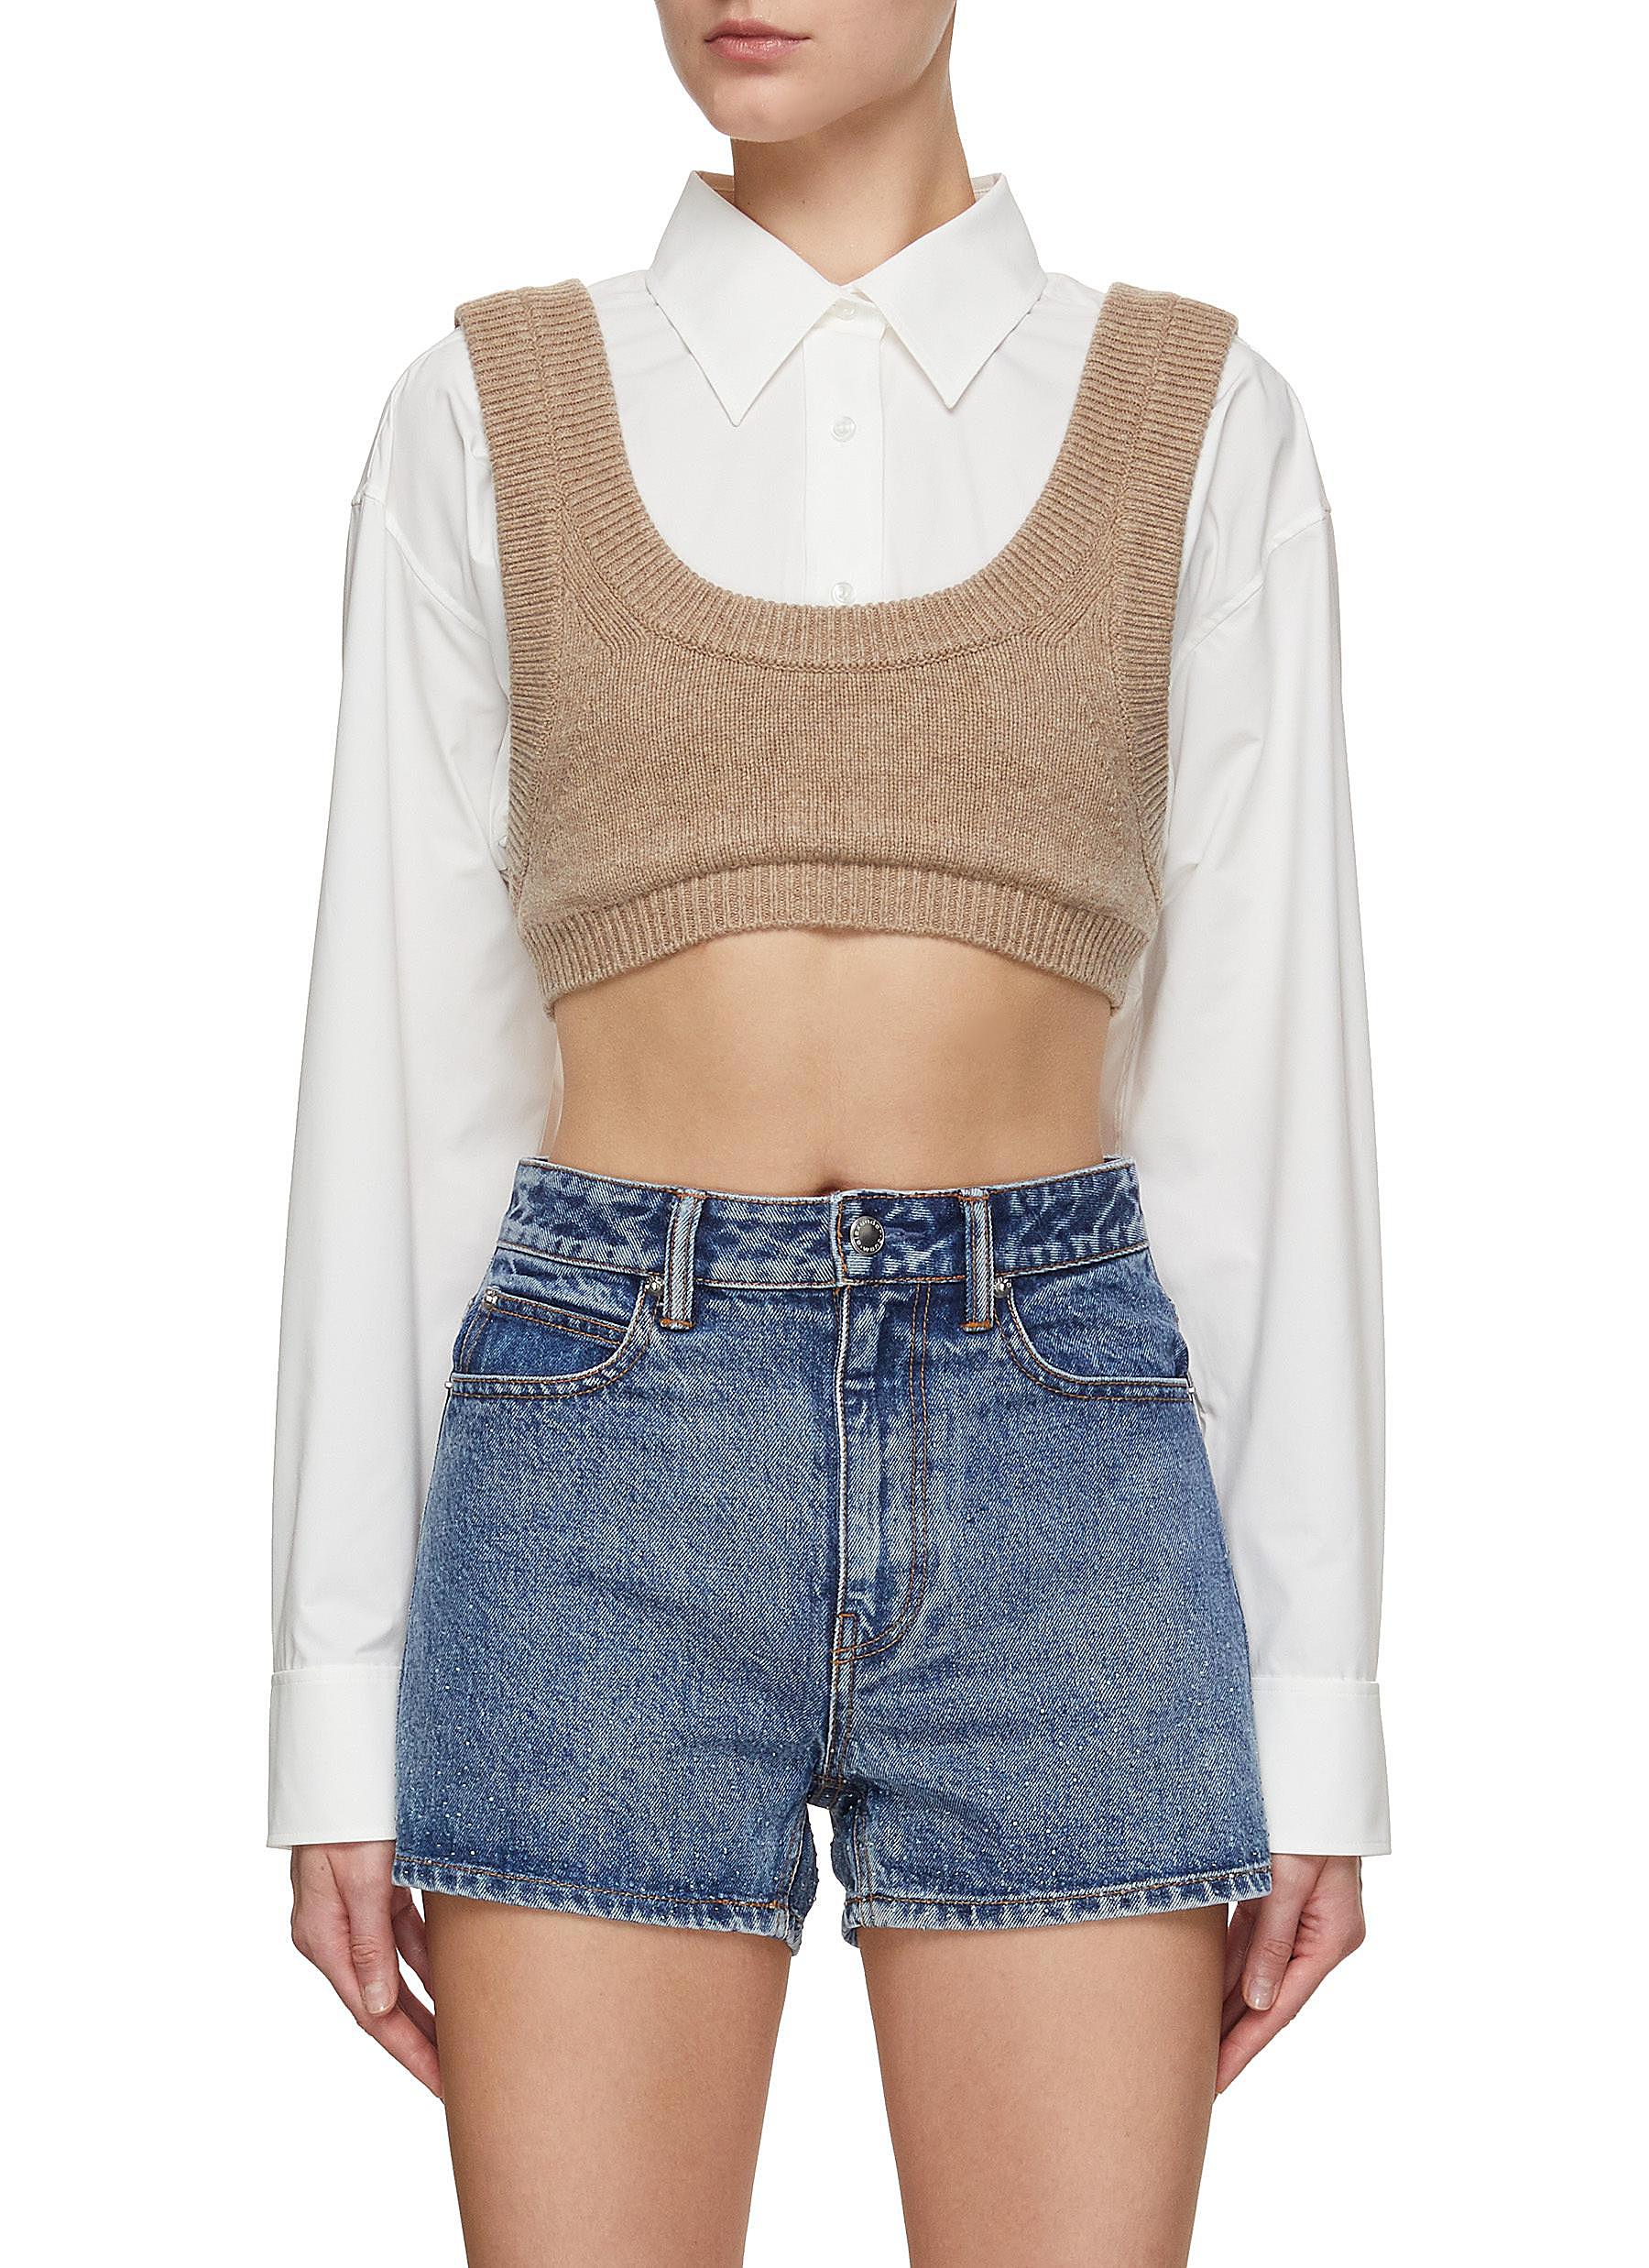 Bilayered Shirt with Cropped Knit Cami